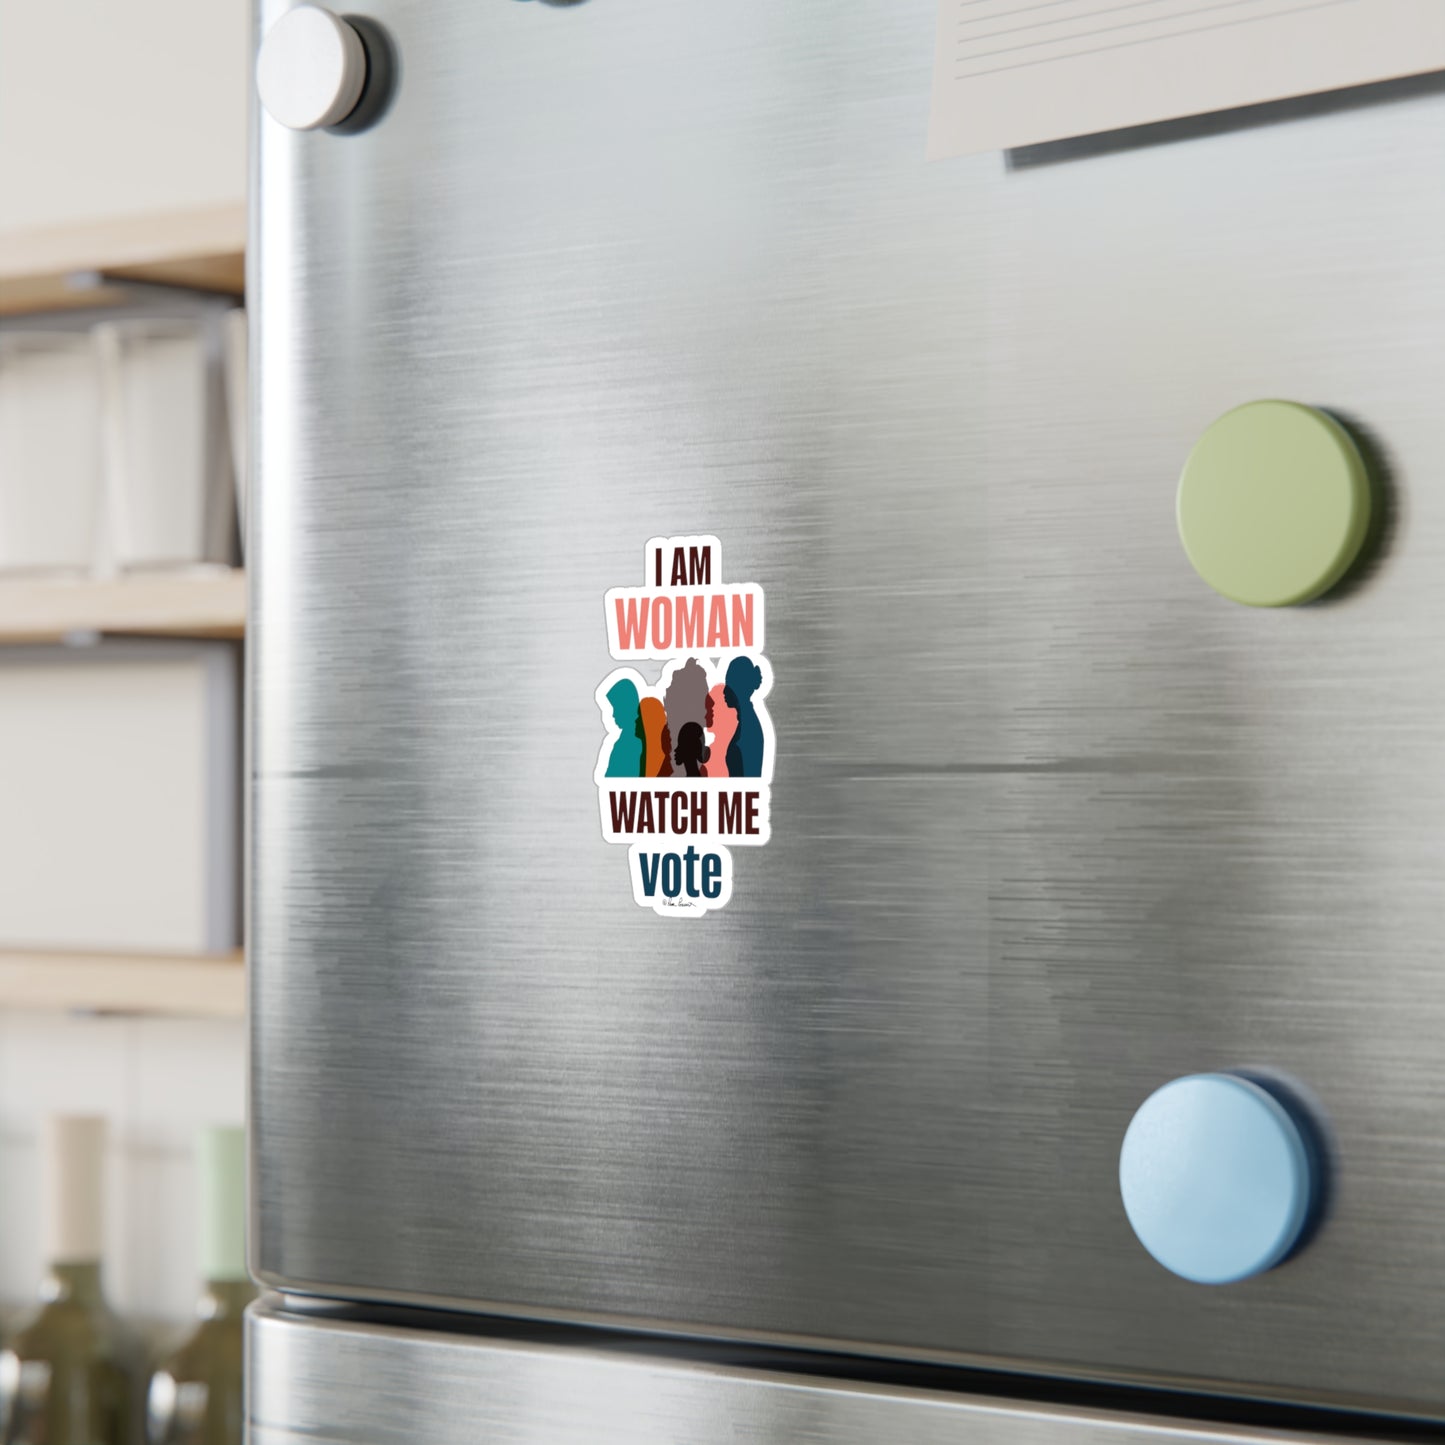 A Printify stainless steel refrigerator door with a removable adhesive Voting Women's Decal that says "i am woman watch me vote" and silhouettes of two women.